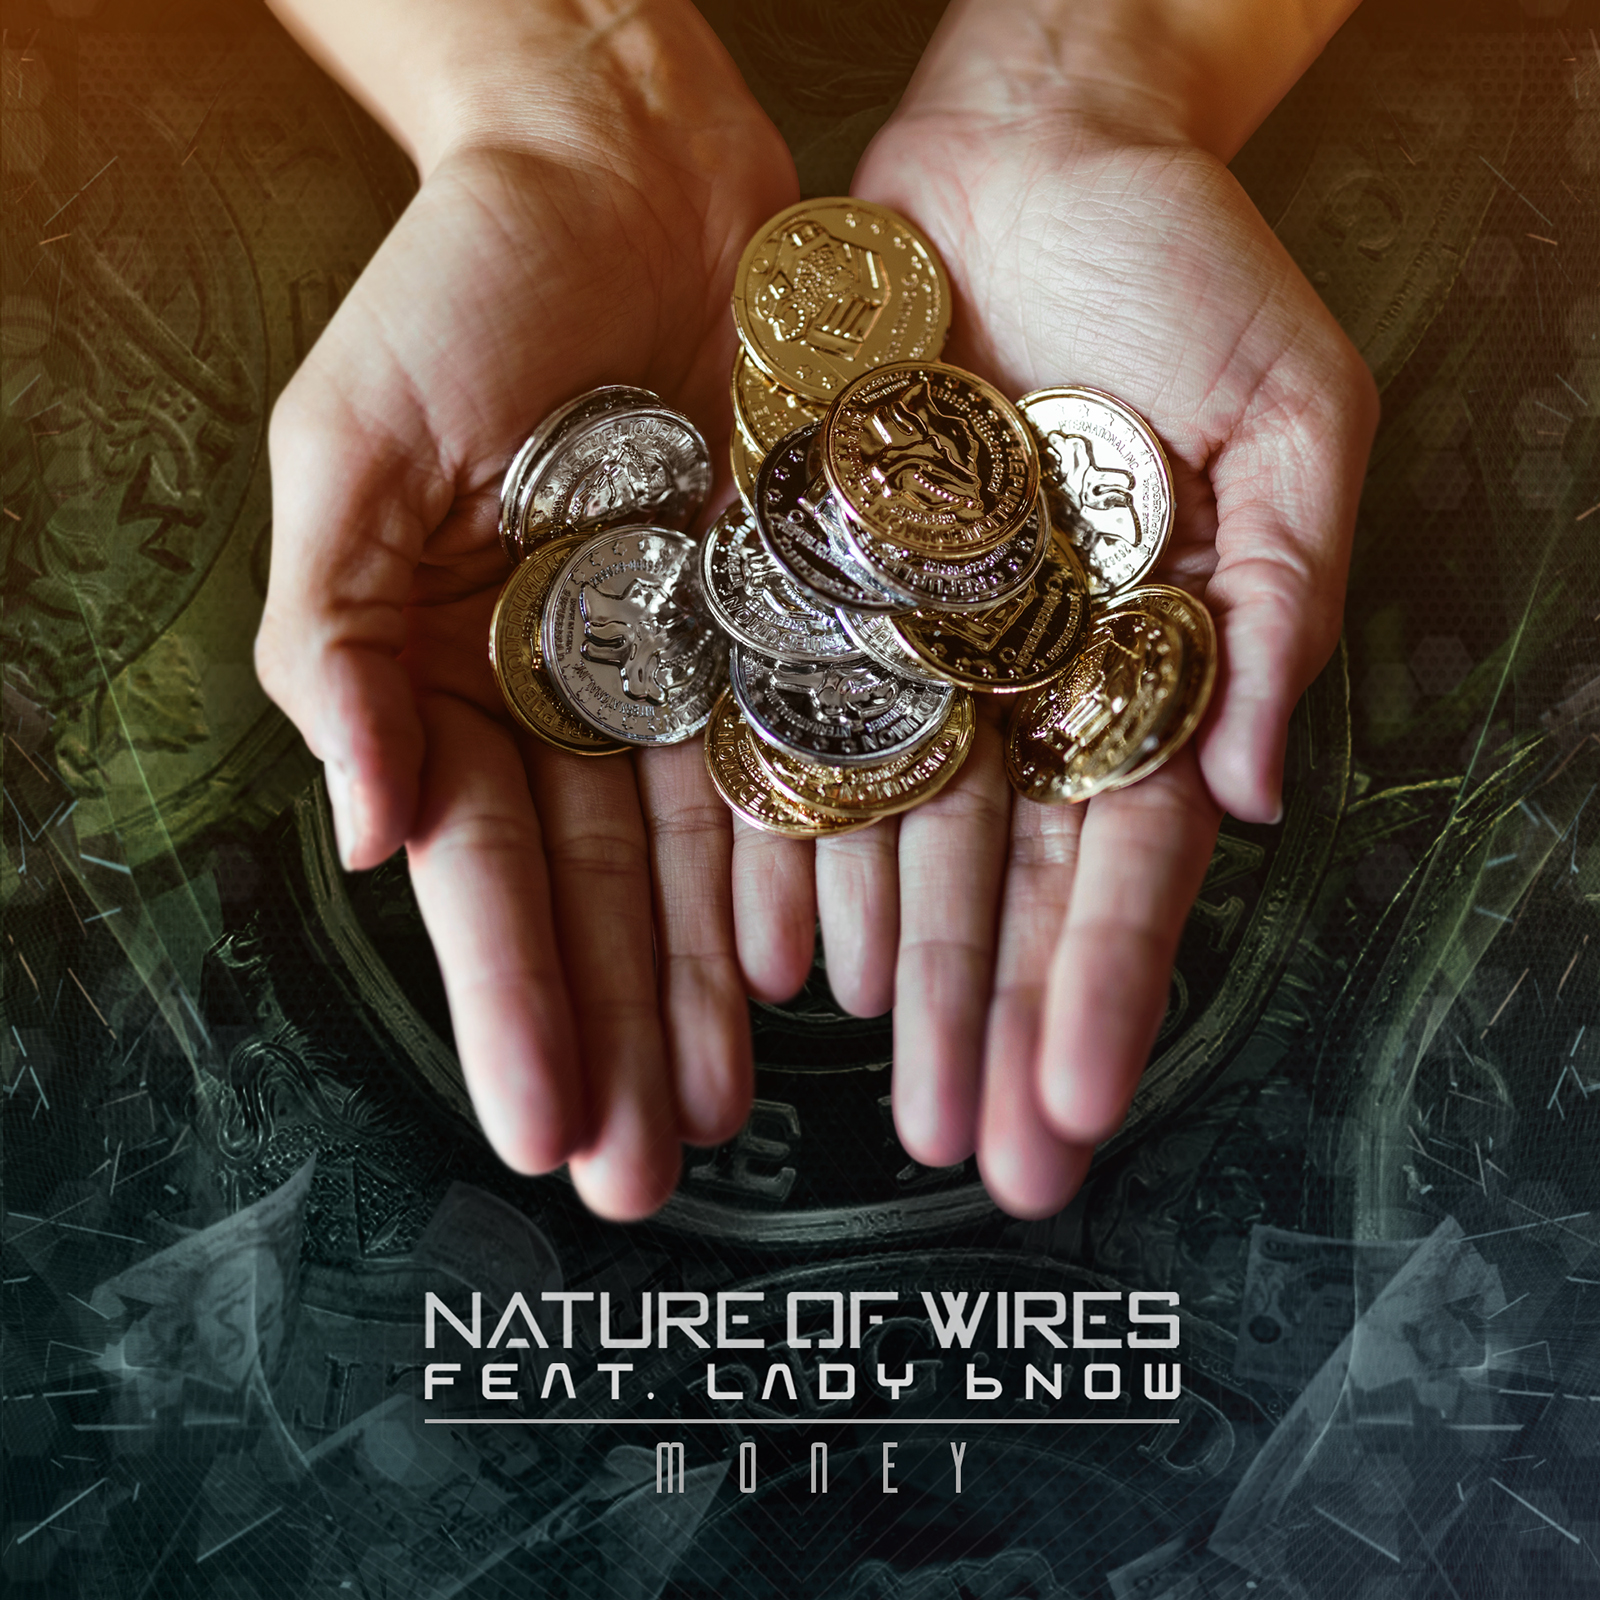 Nature of Wires - Money (ft Lady bNOW) - Nature of Wires - Money (ft Lady bNOW)